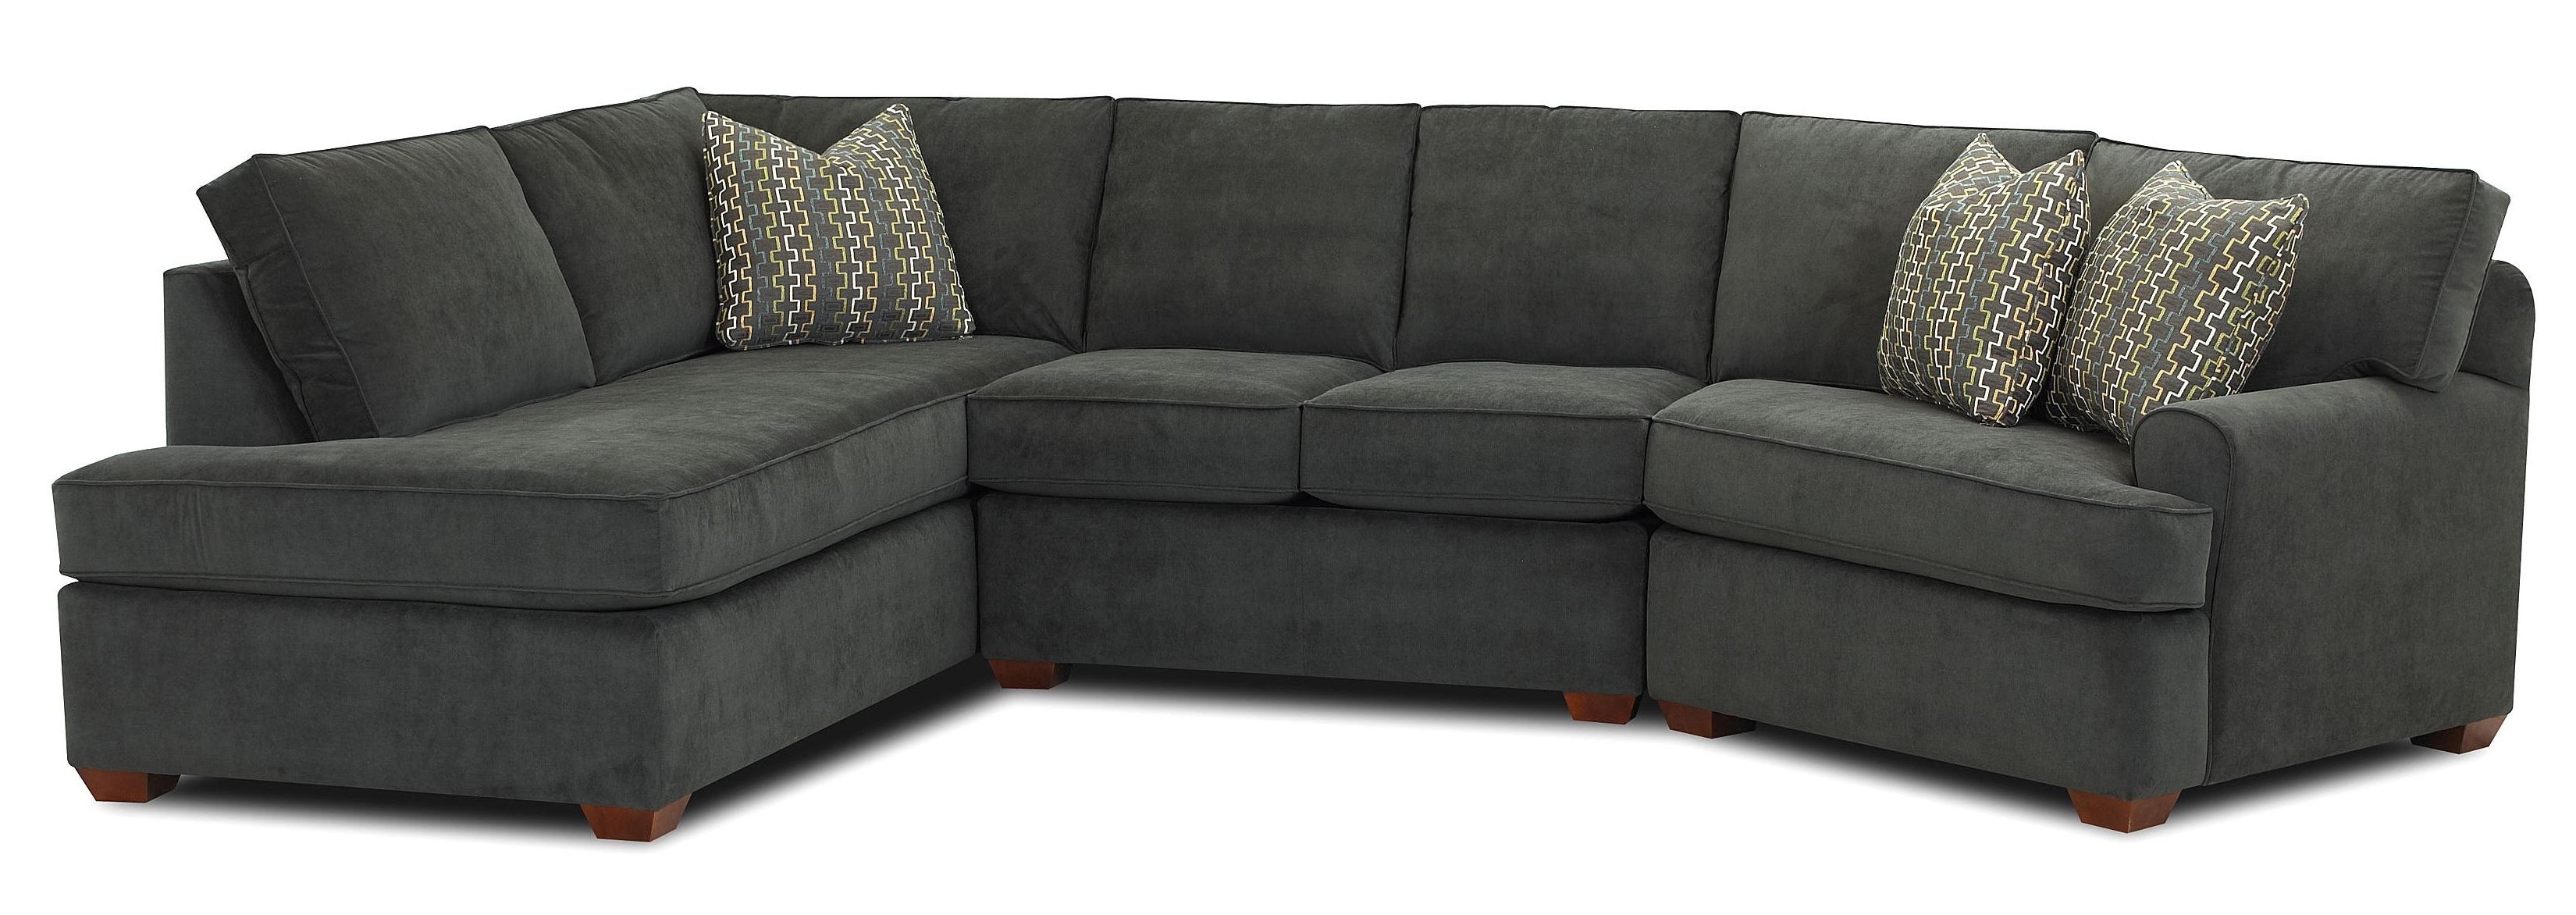 Most Recent Best Ideas Of Sectionals With Chaise Lounge Also Living Room Grey Intended For Charcoal Sectionals With Chaise (View 9 of 15)